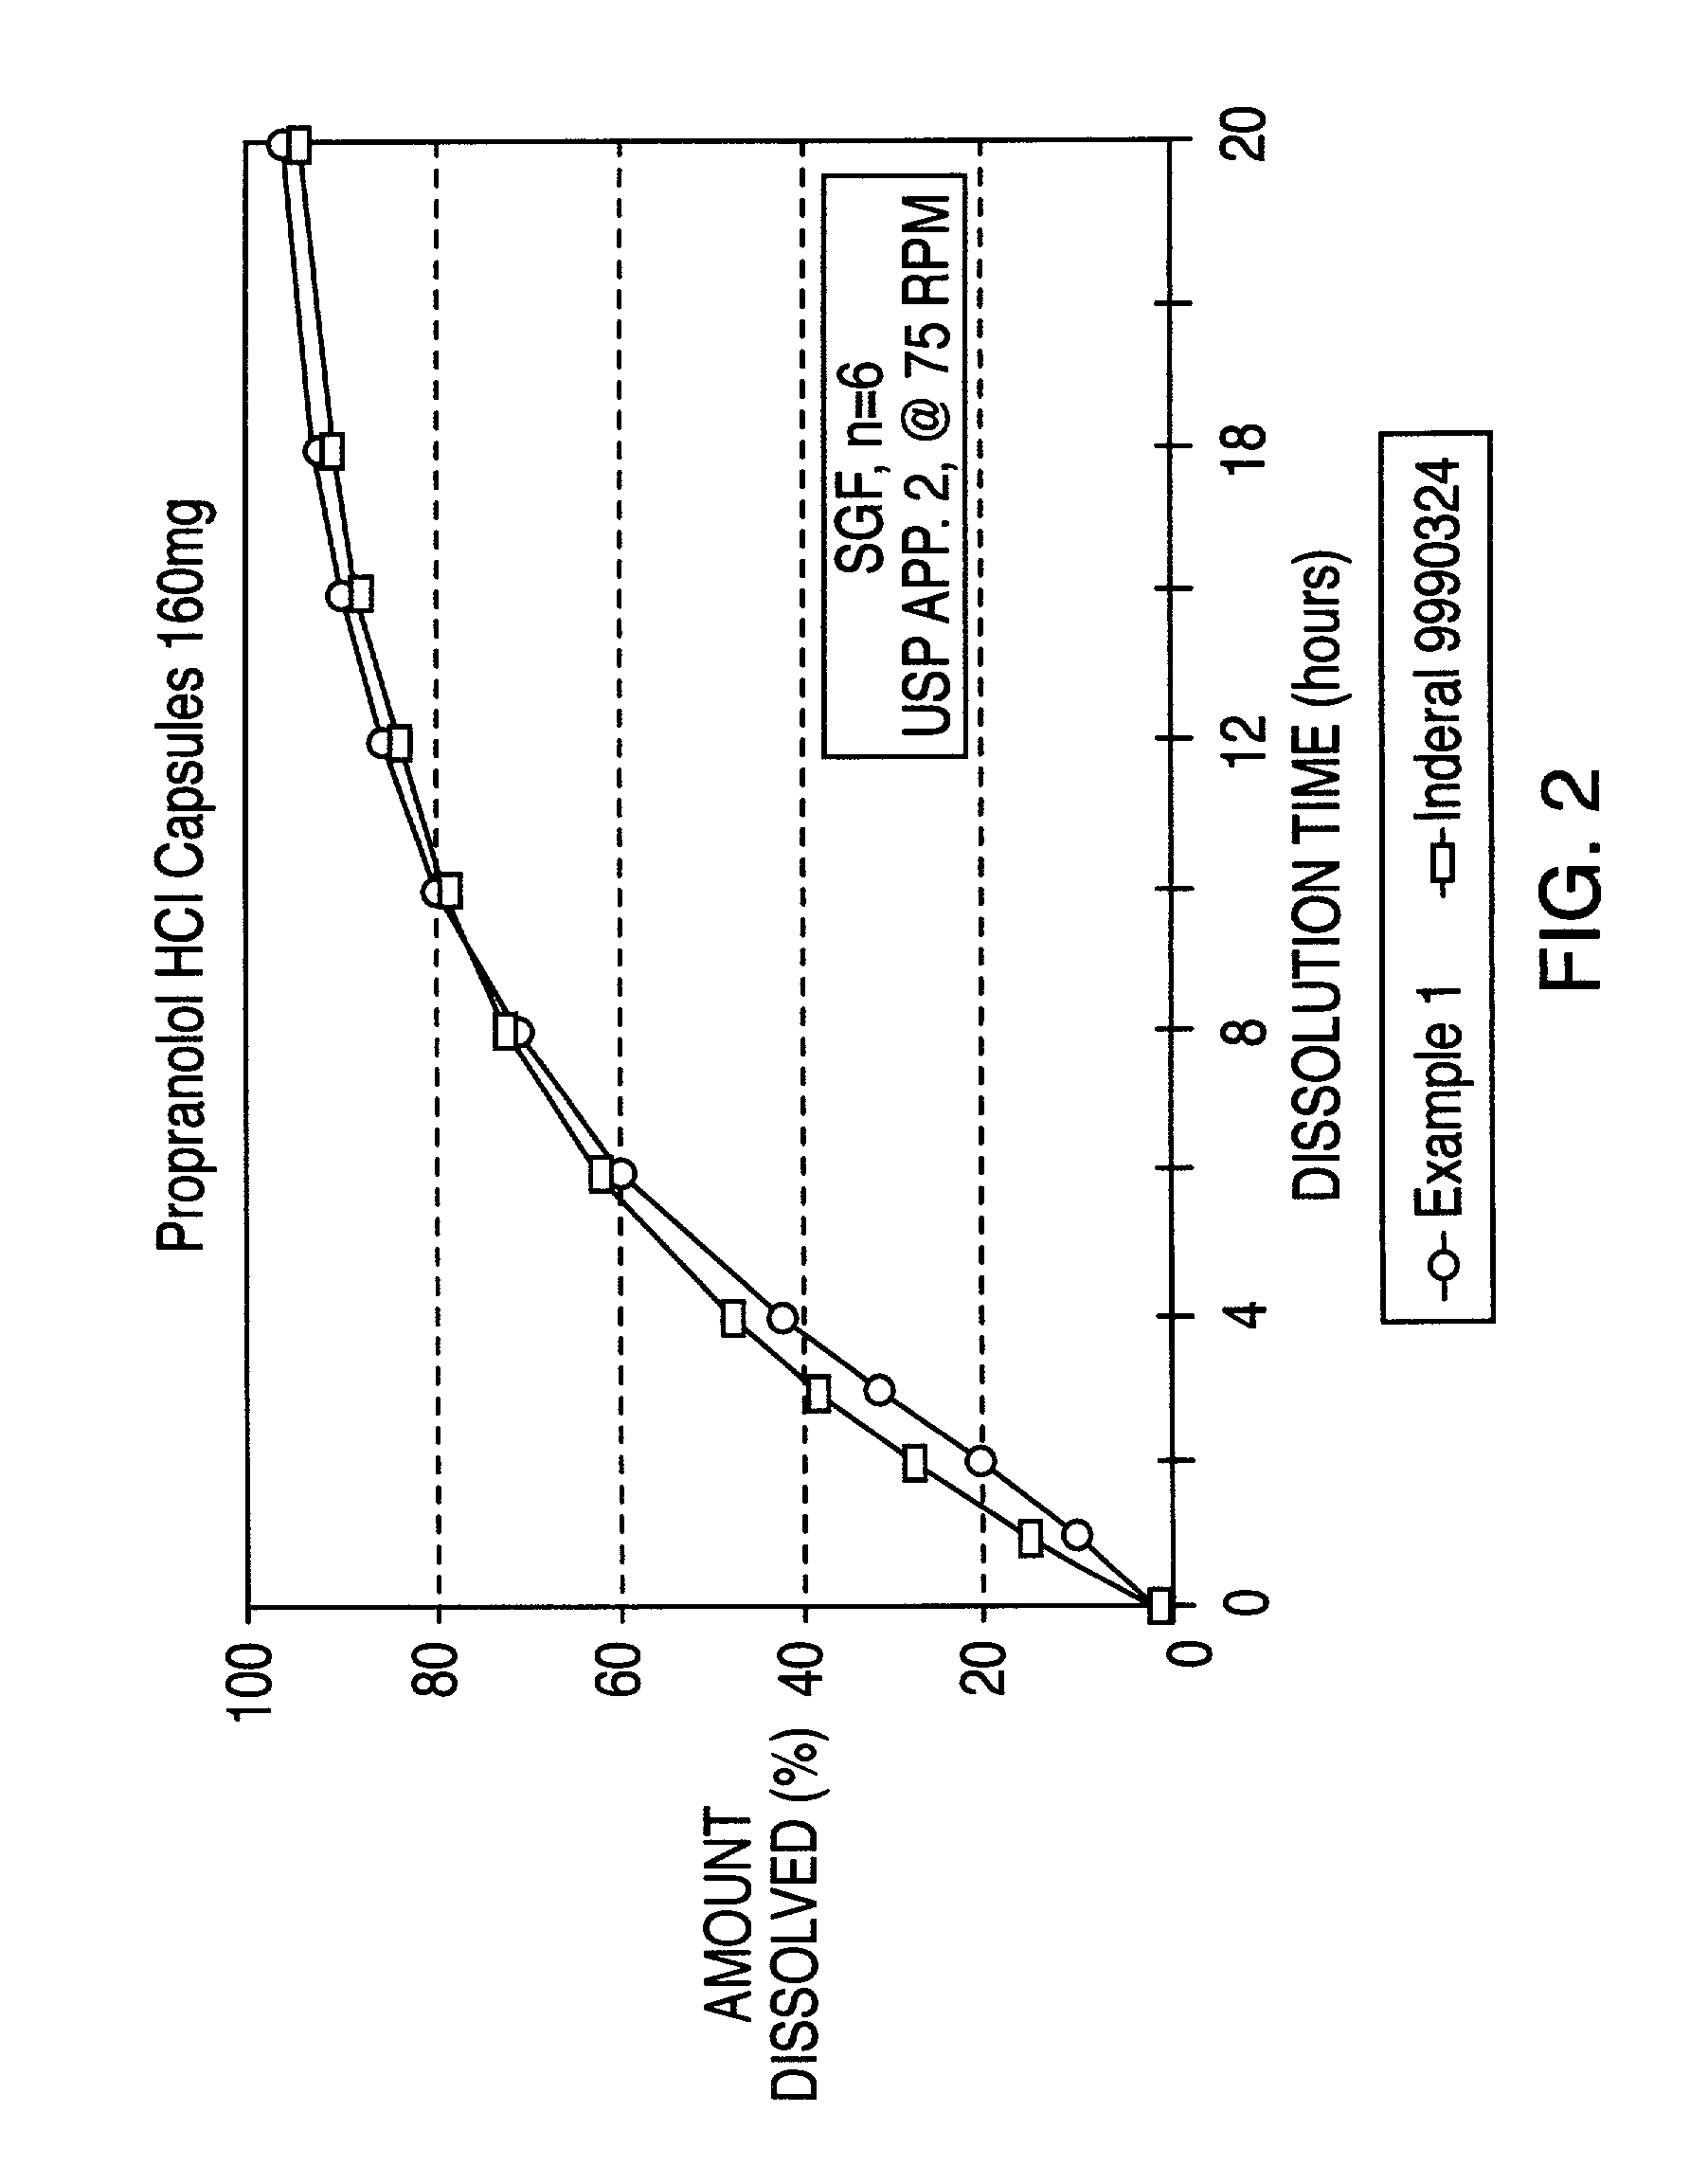 Controlled release oral dosage form of beta-adrenergic blocking agents